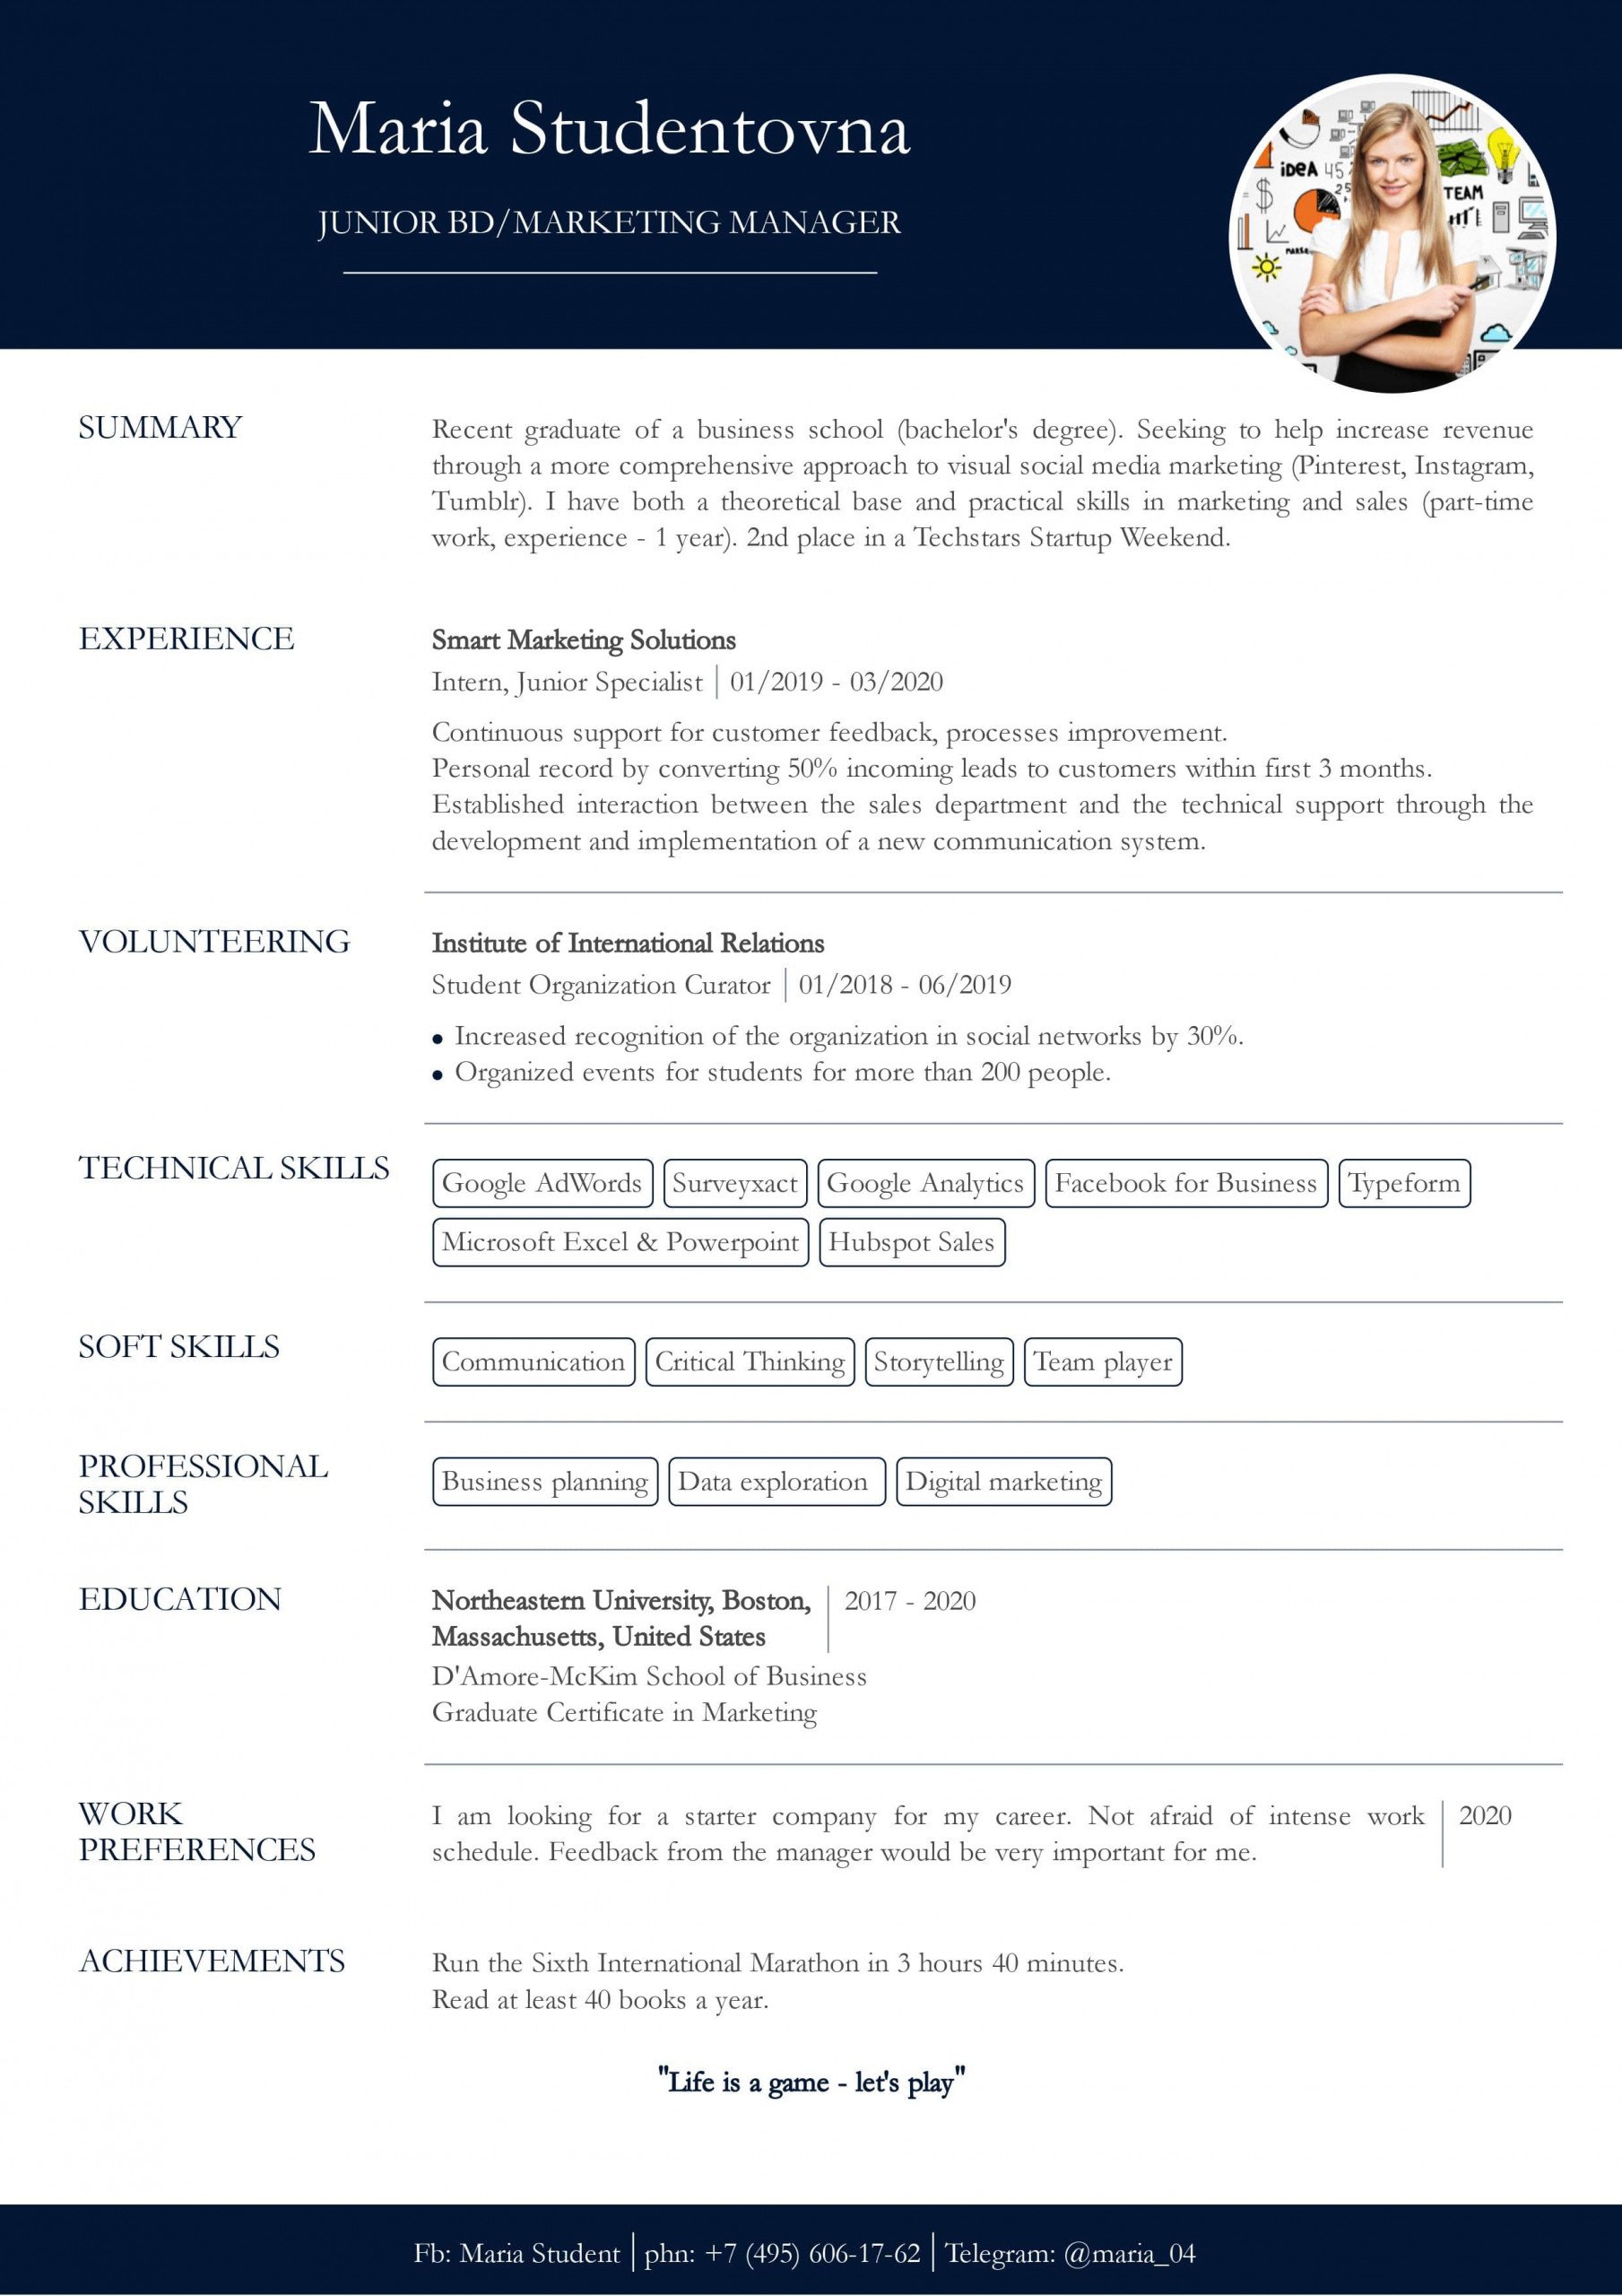 Resume Examples for Students with No Work Experience Template Resume with No Work Experience. Sample for Students. – Cv2you Blog